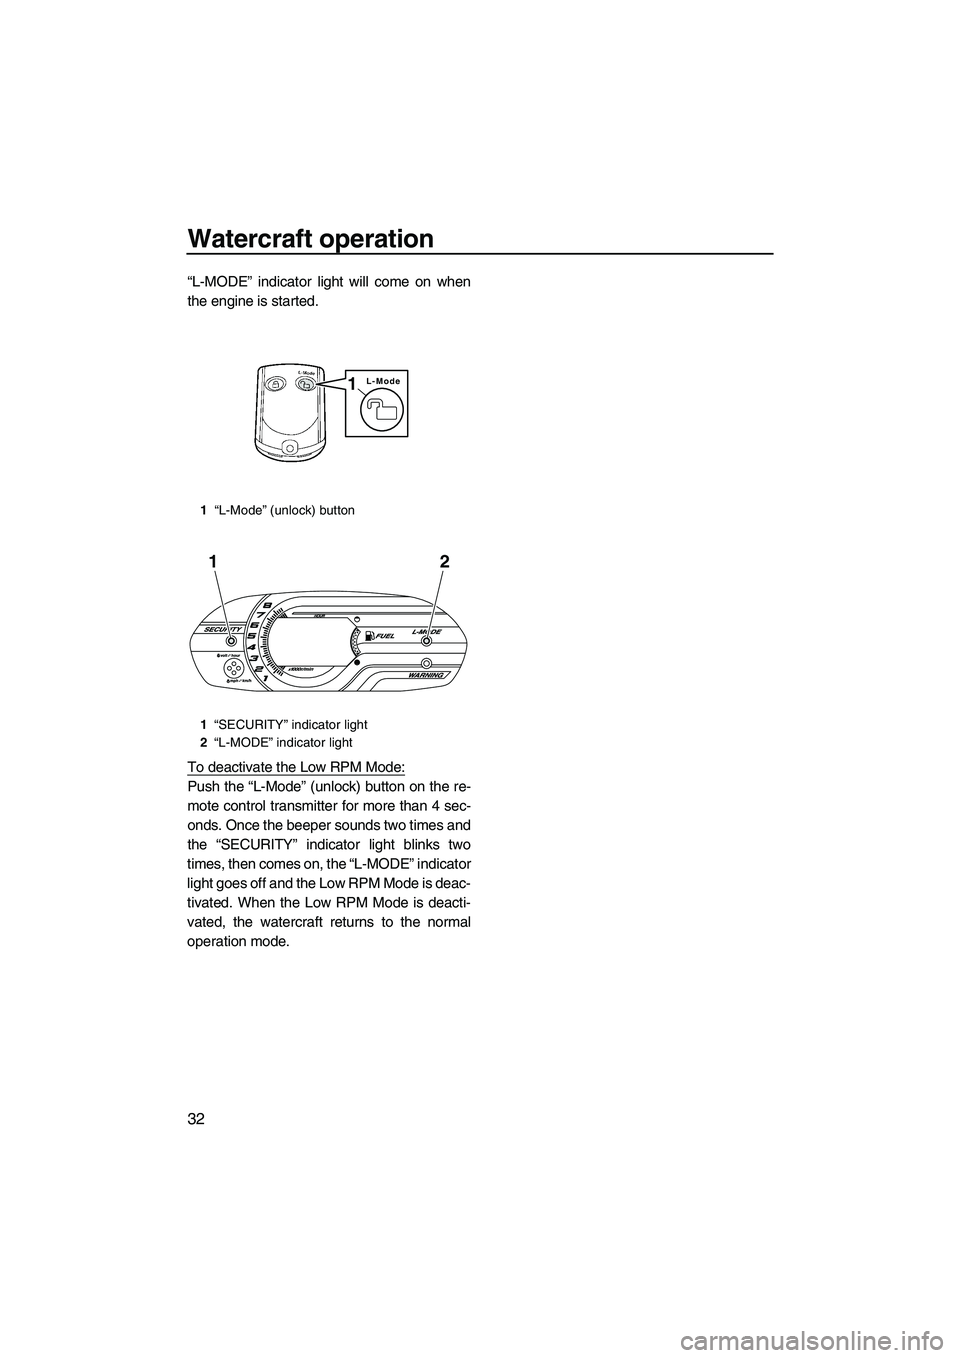 YAMAHA VXS 2012 Owners Guide Watercraft operation
32
“L-MODE” indicator light will come on when
the engine is started.
To deactivate the Low RPM Mode:
Push the “L-Mode” (unlock) button on the re-
mote control transmitter 